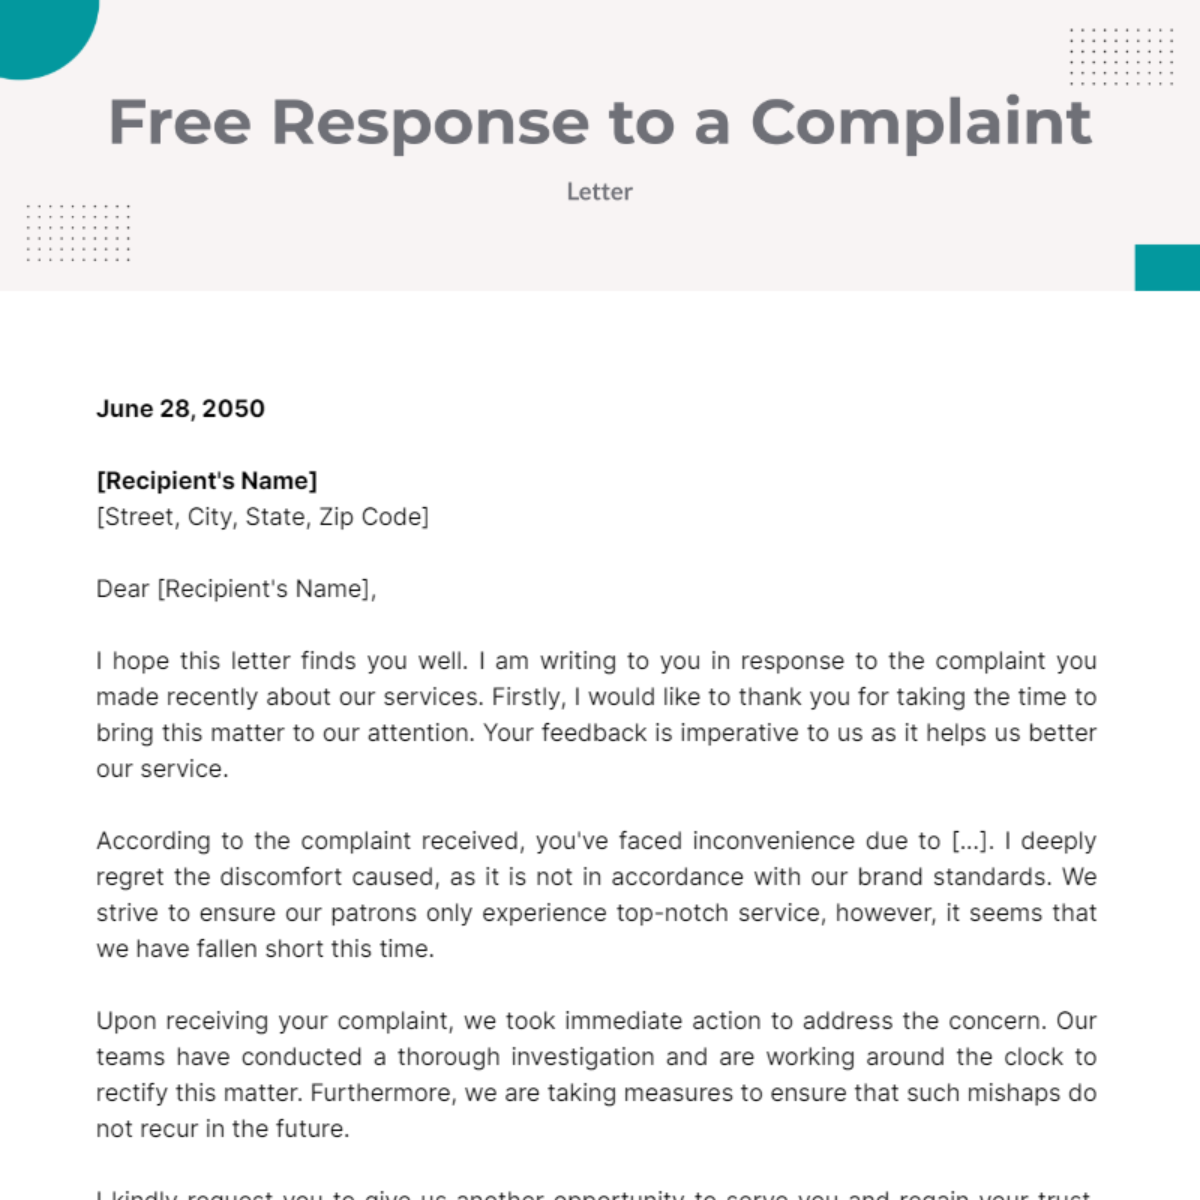 Free Response Letter to a Complaint